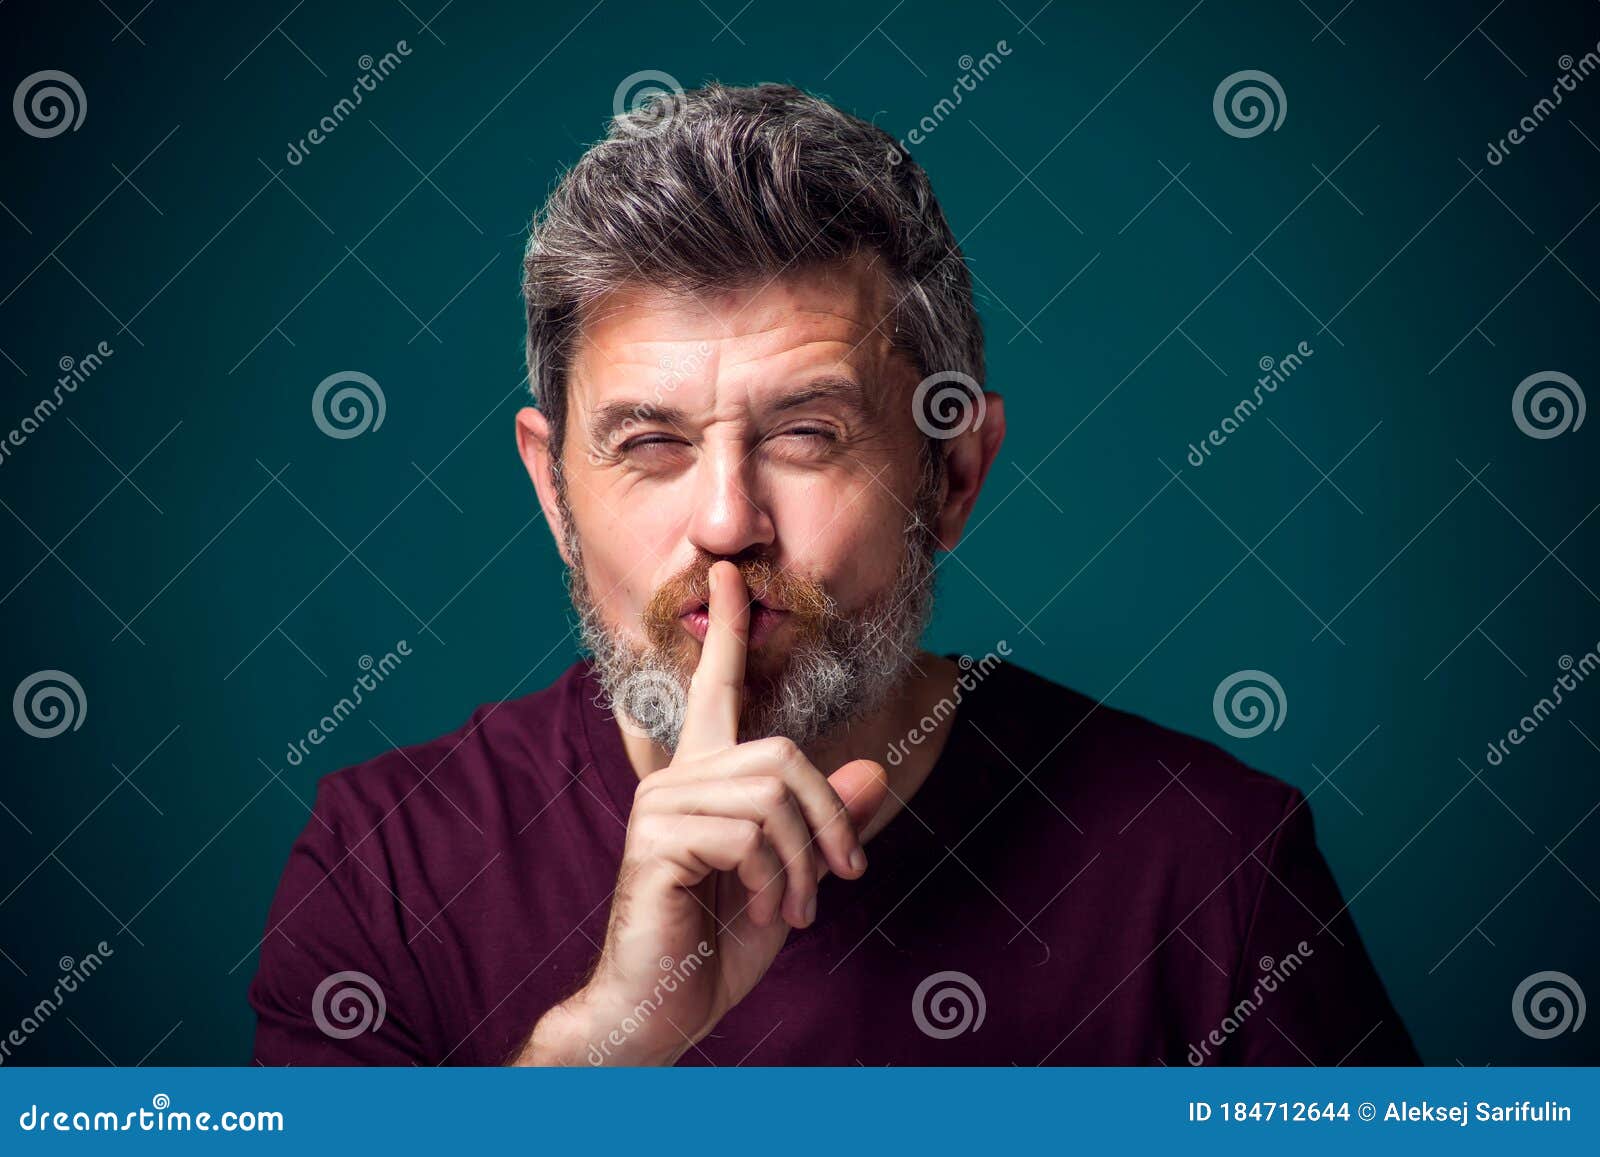 a portrait of bearded man showing hush gesture. people and emotions concept